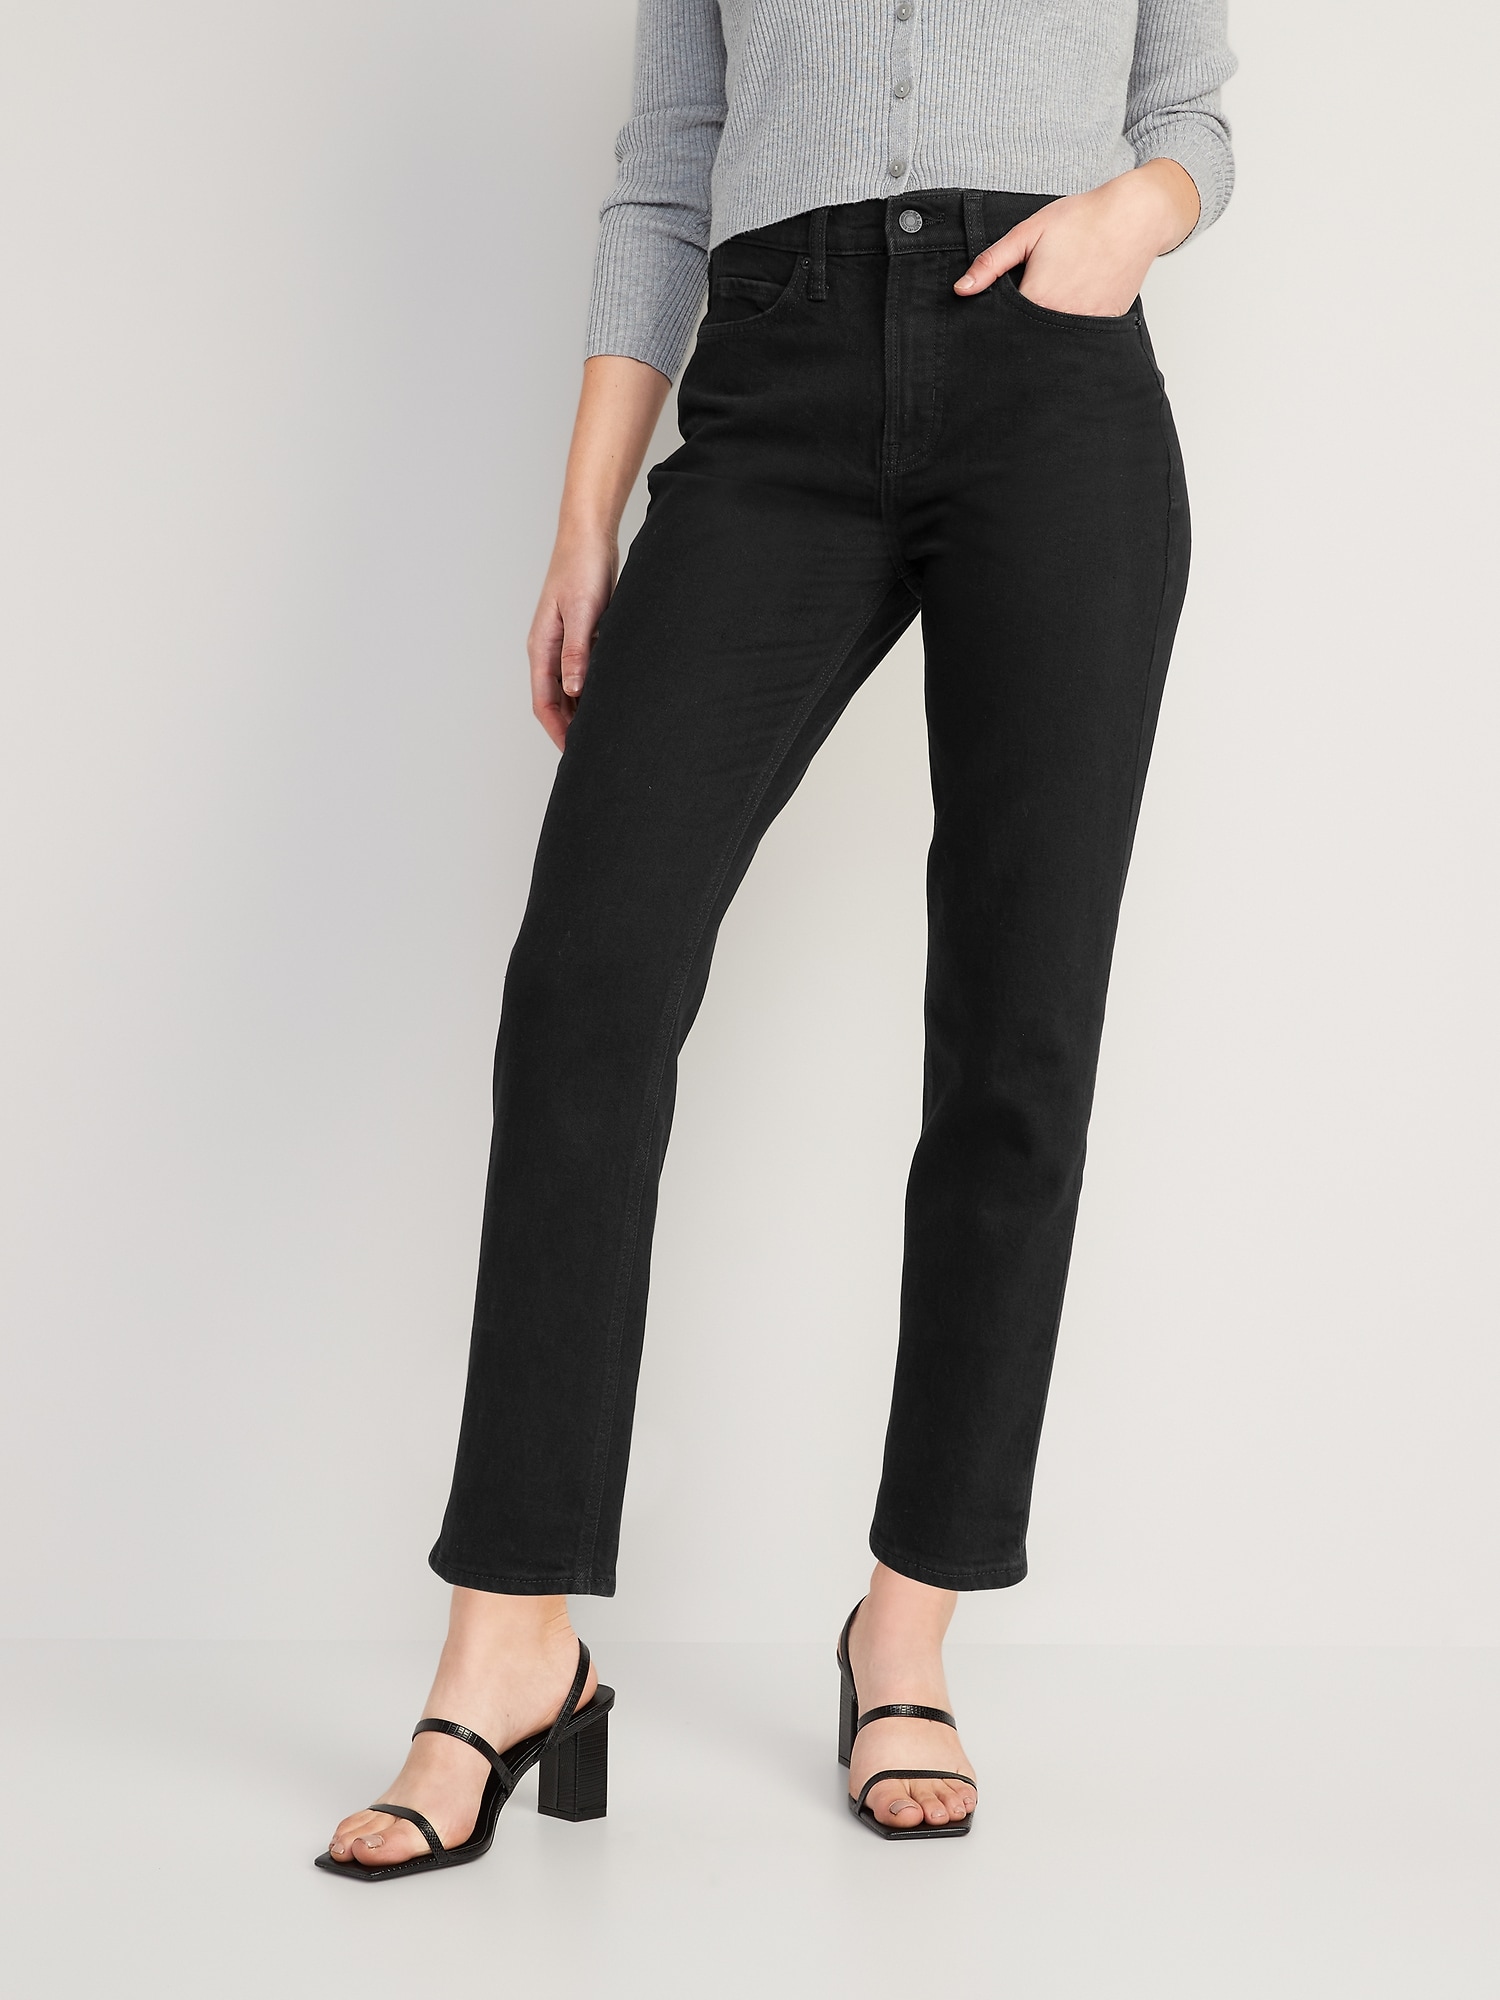 Extra High-Waisted Sky-Hi Straight Black Jeans for Women